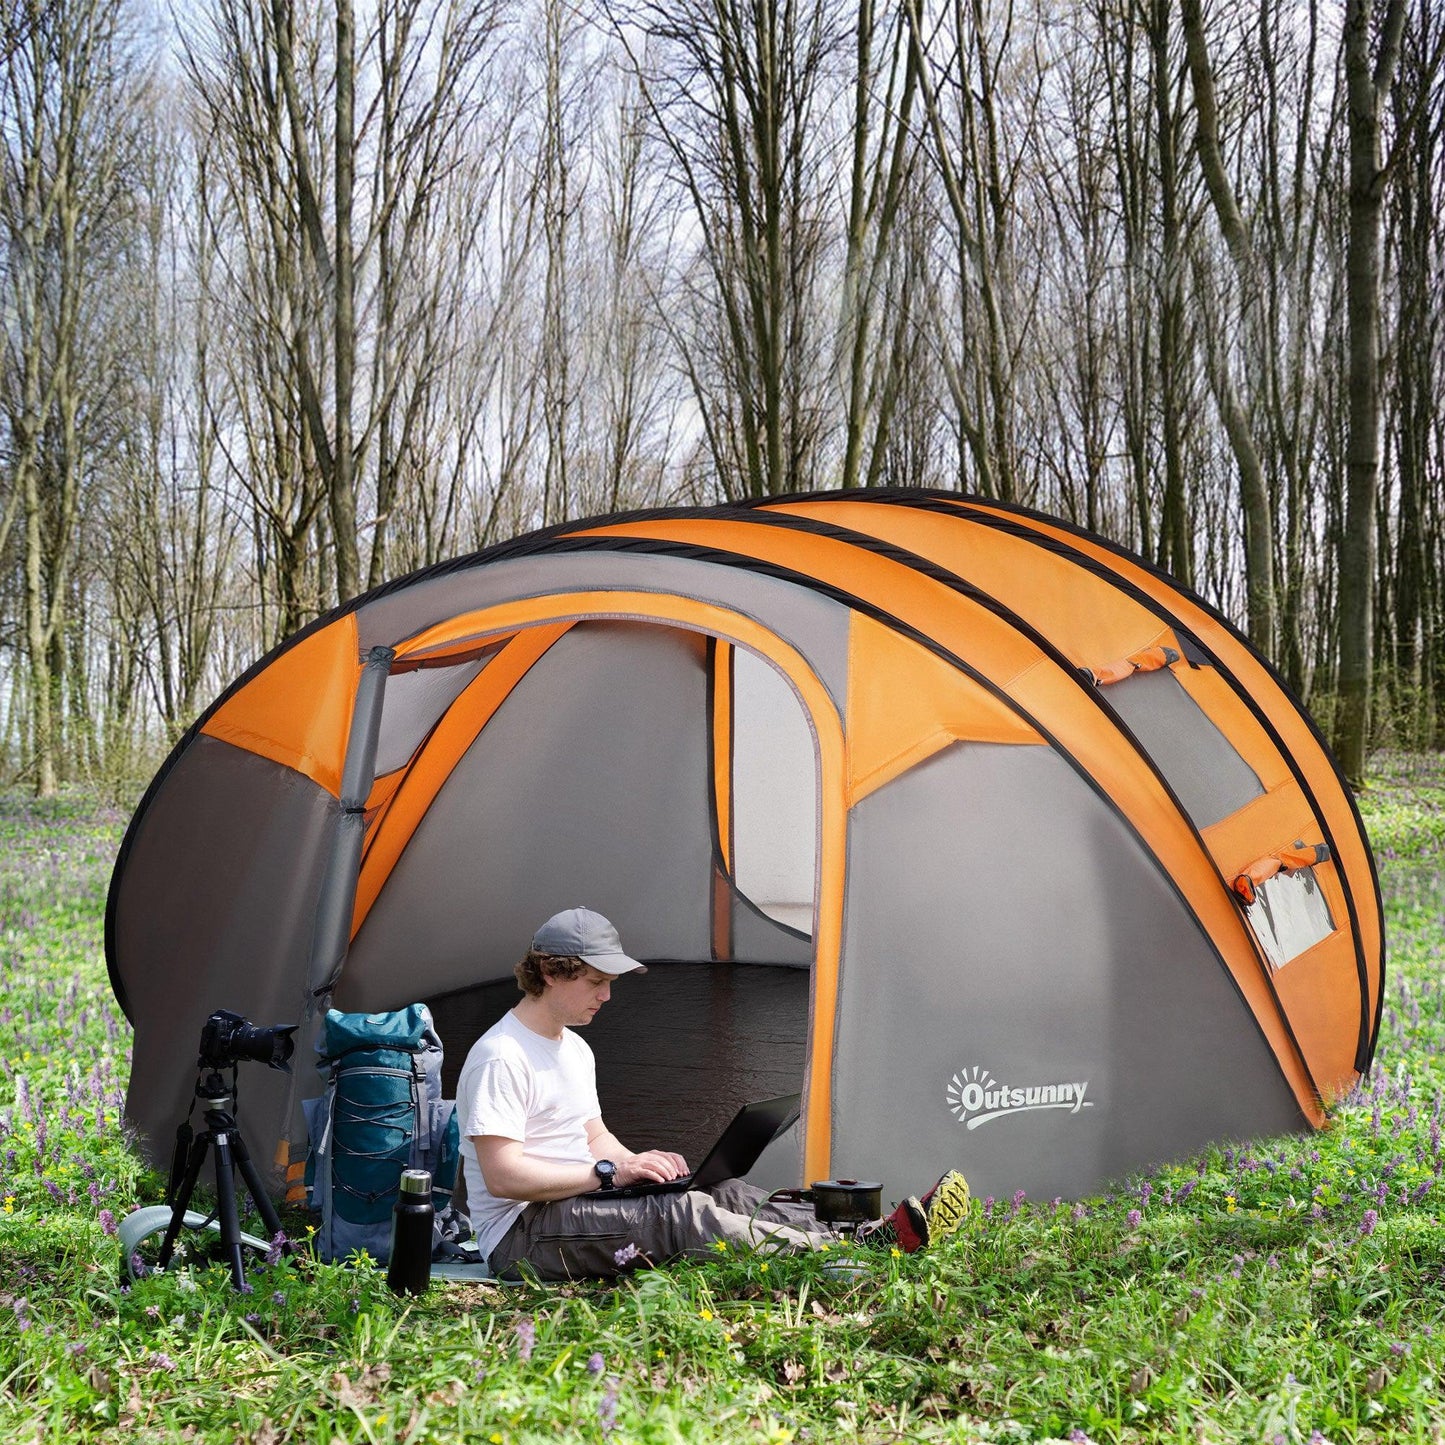 Outsunny 4-5 Person Pop-up Waterproof Camping Tent - ALL4U RETAILER LTD